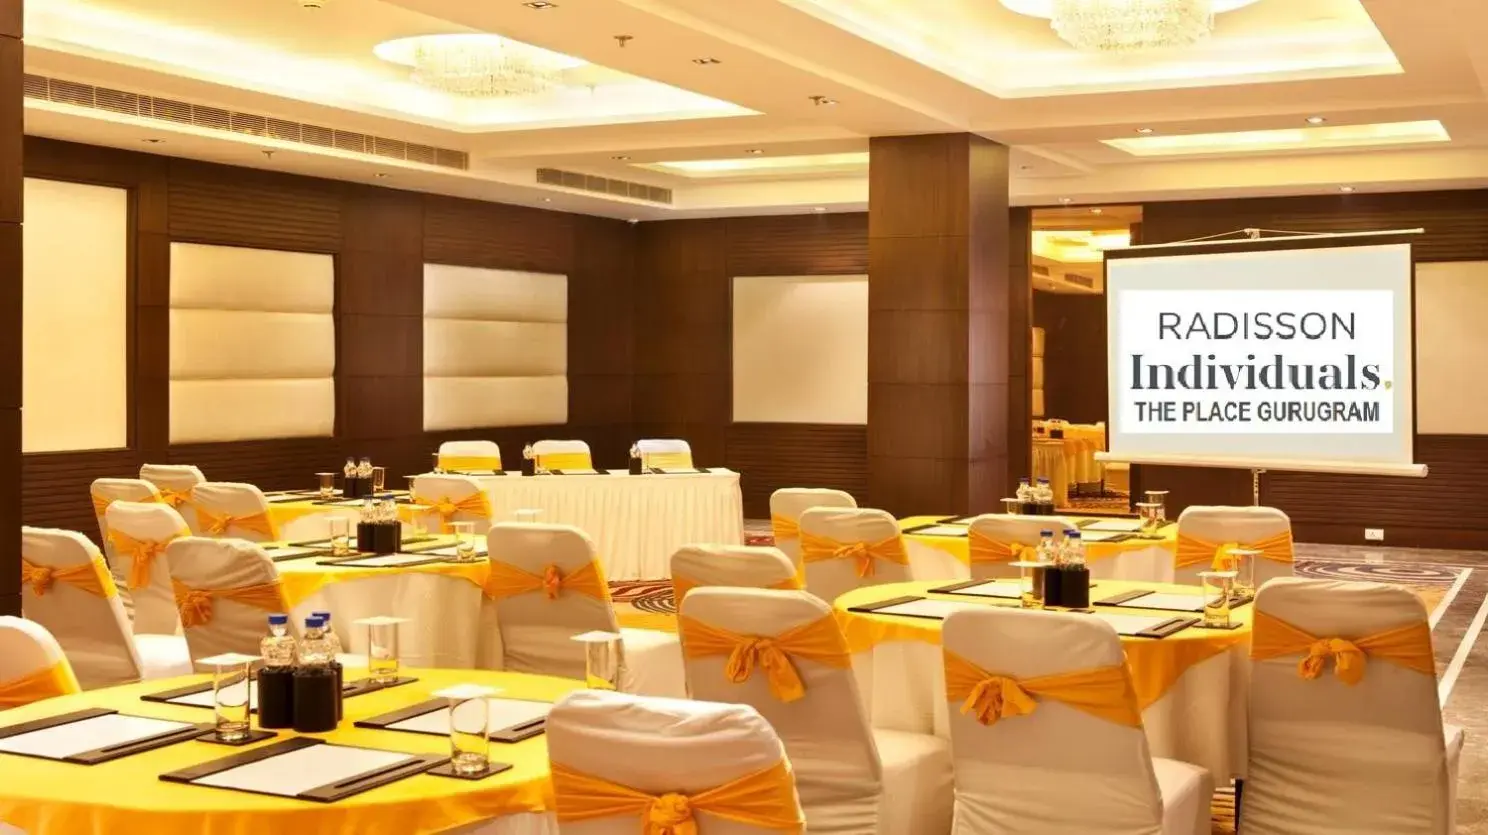 Meeting/conference room in The Place Gurugram, a member of Radisson Individuals